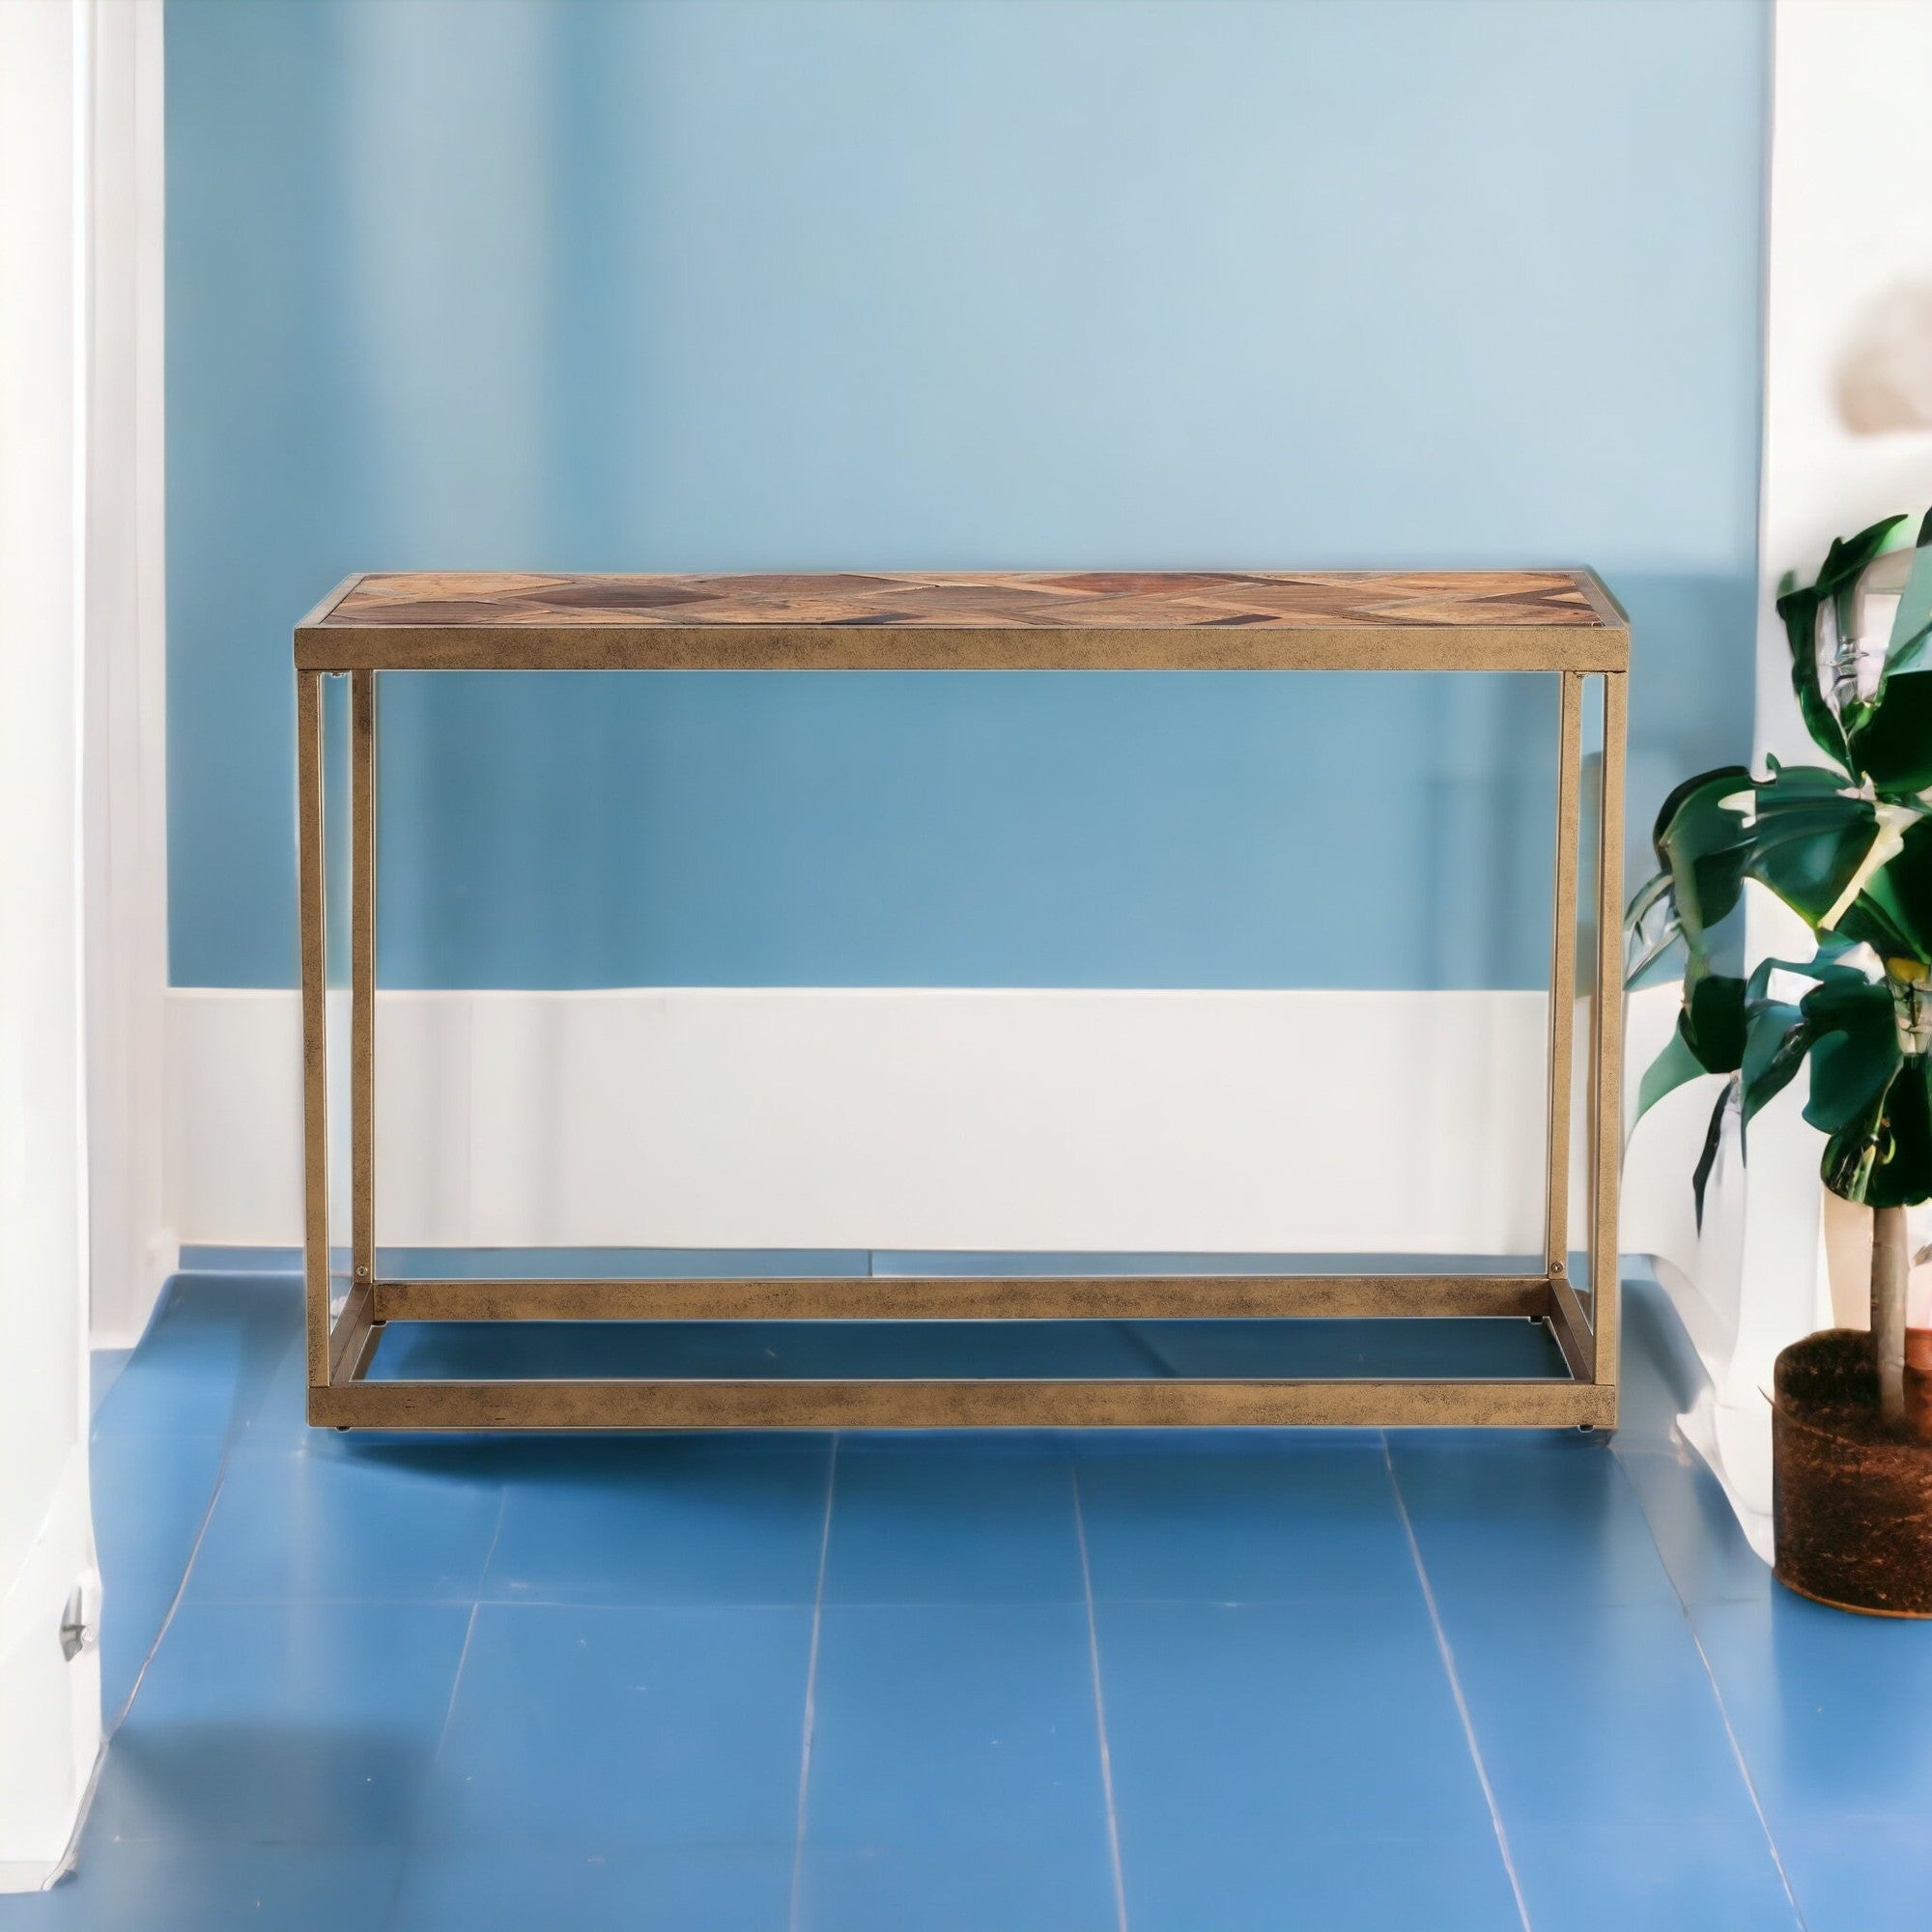 48" Natural Reclaimed Wood and Metal Frame Console Table